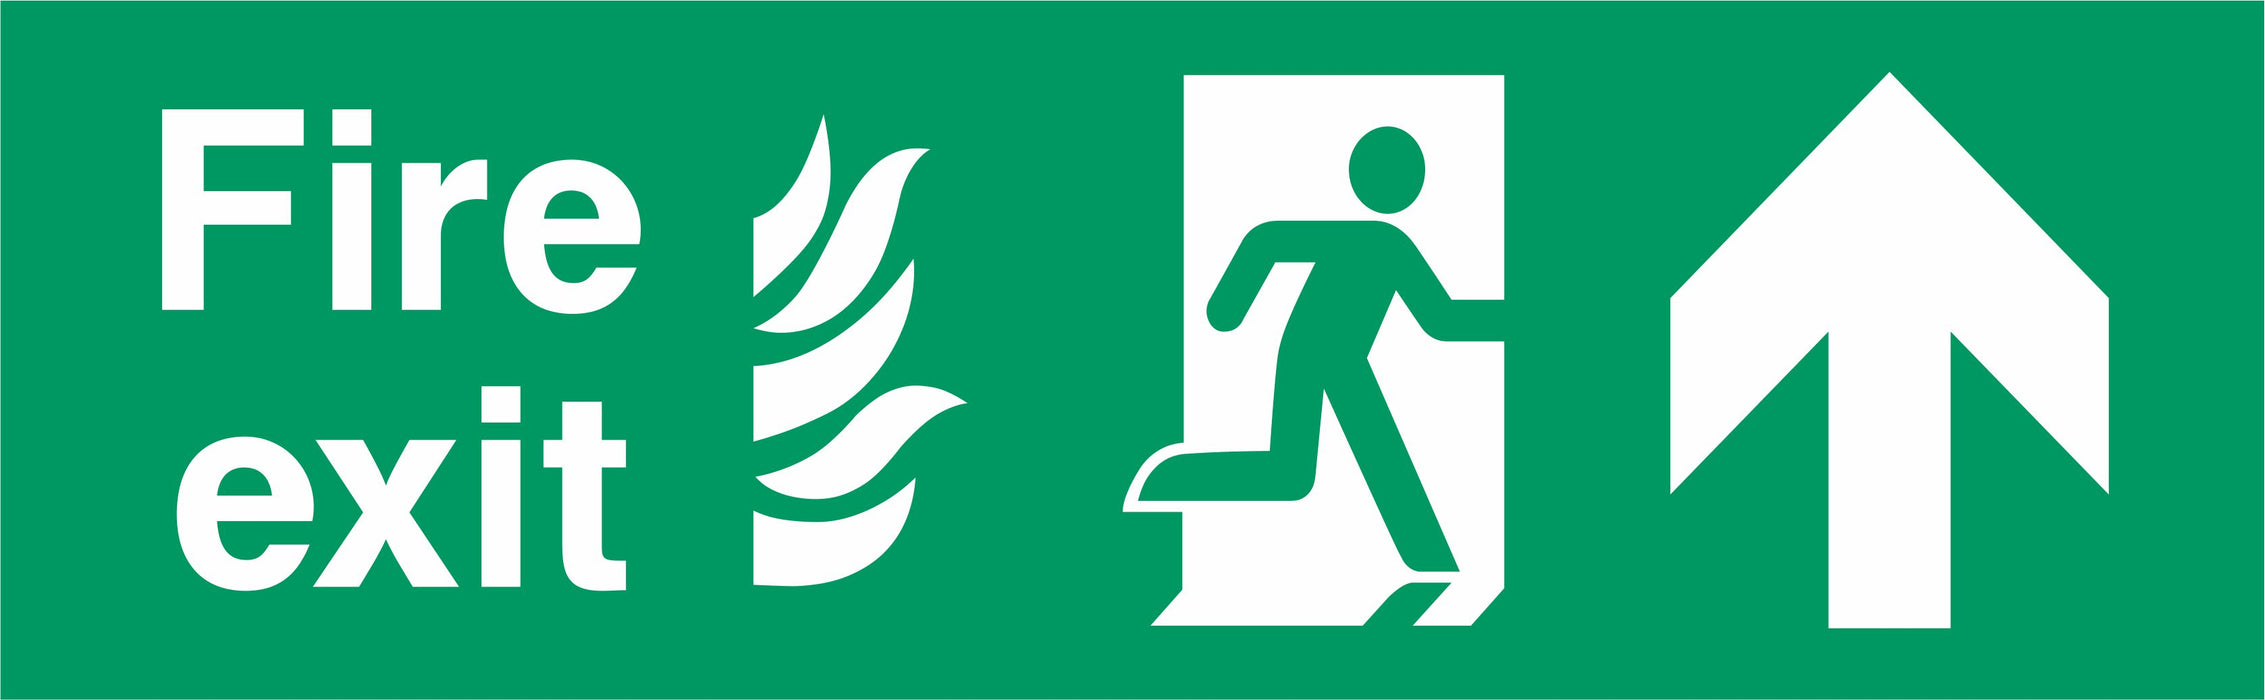 Fire Exit - Running Man Right - Up Arrow - NHS COMPLIANT